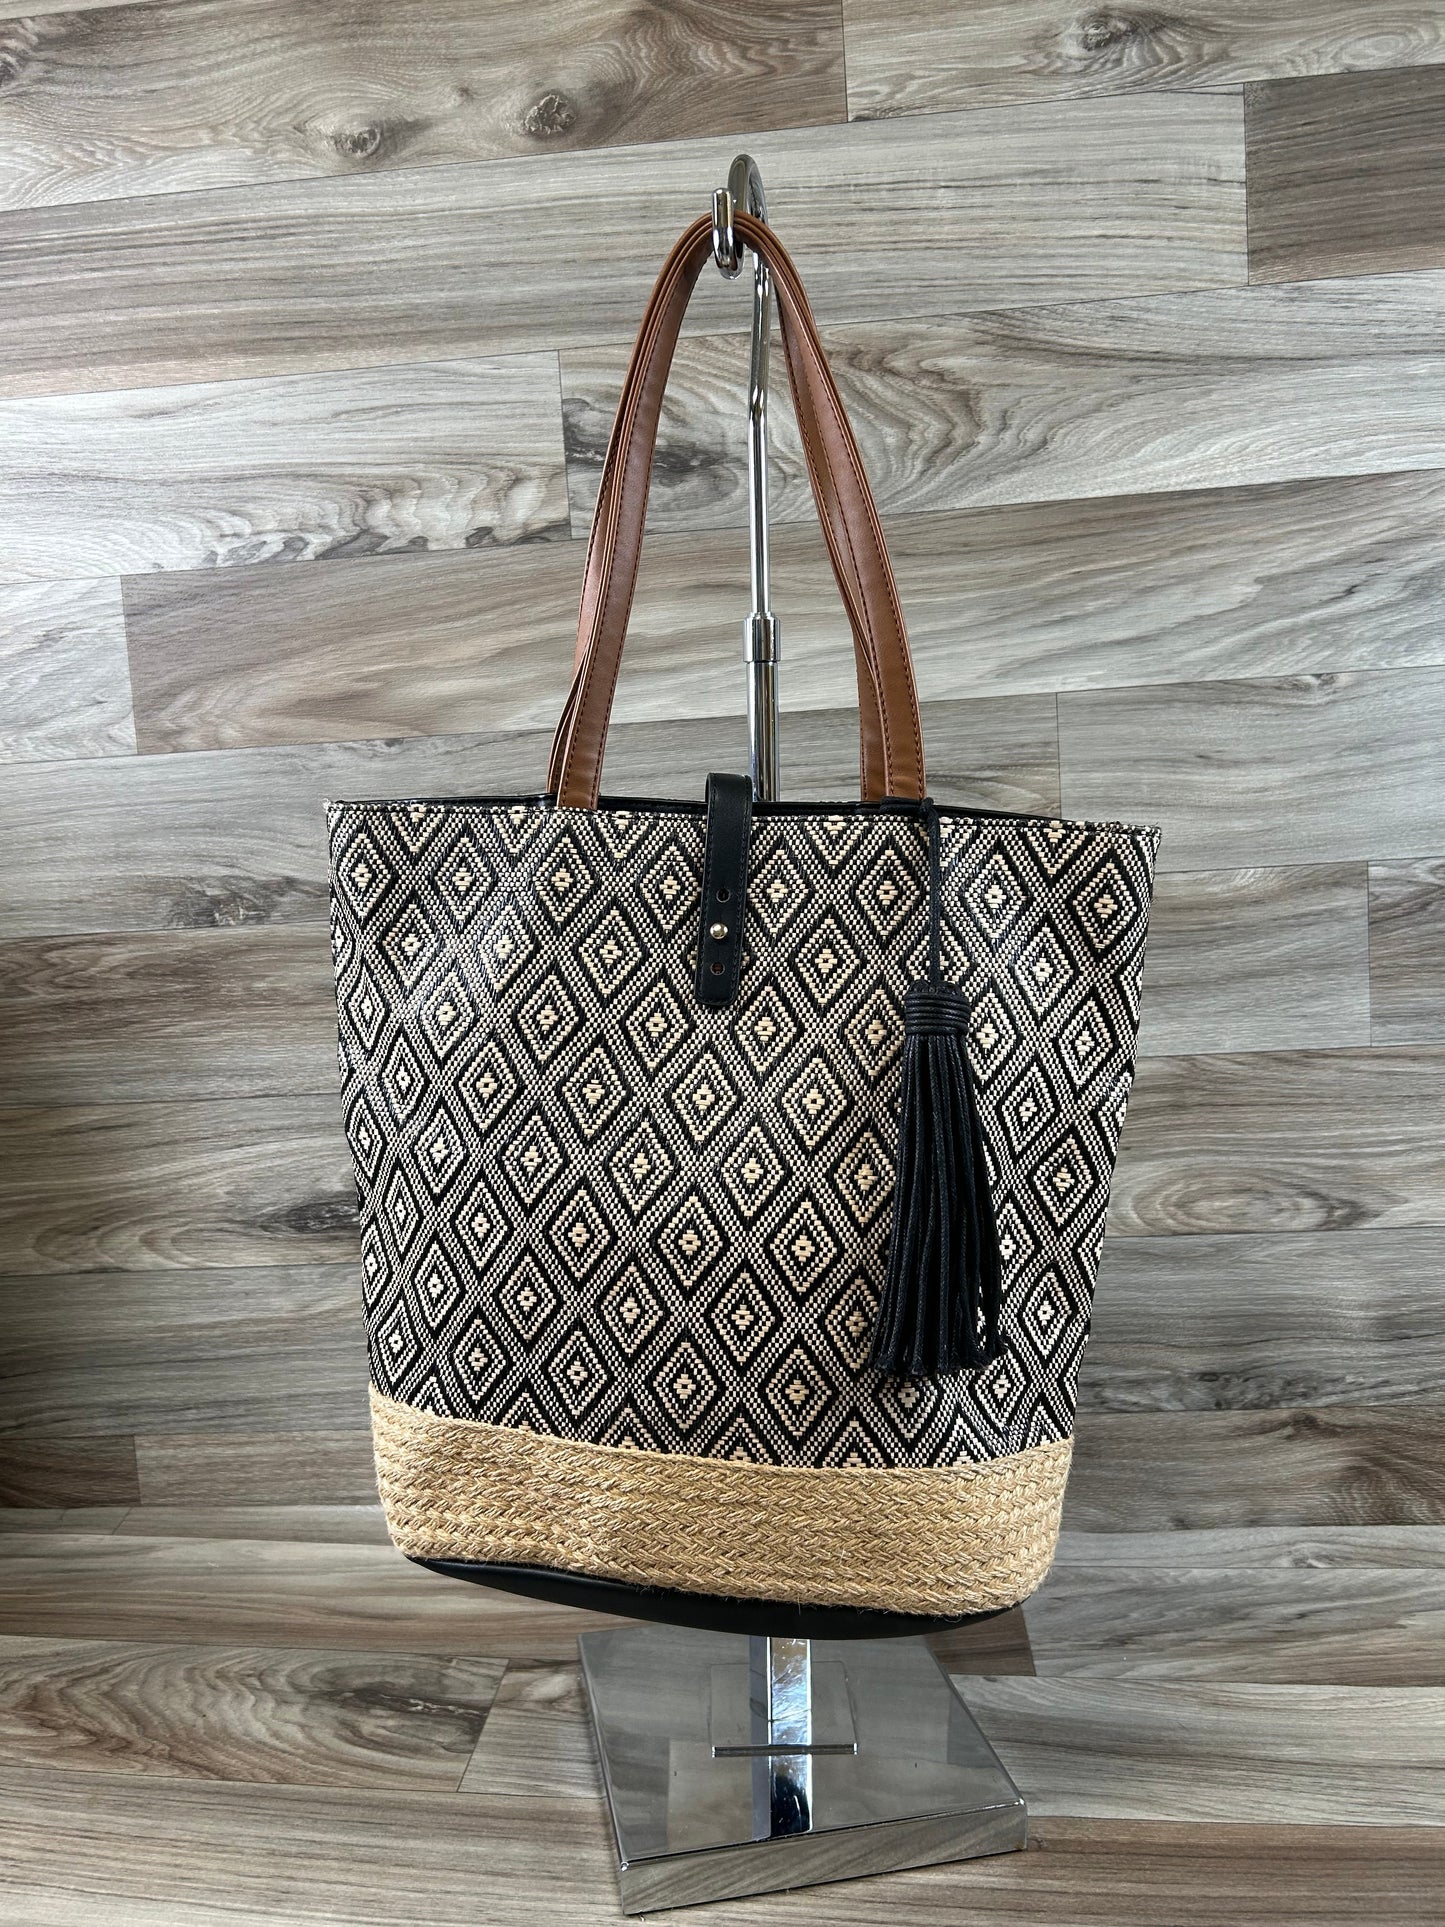 Tote Kelly And Katie, Size Medium